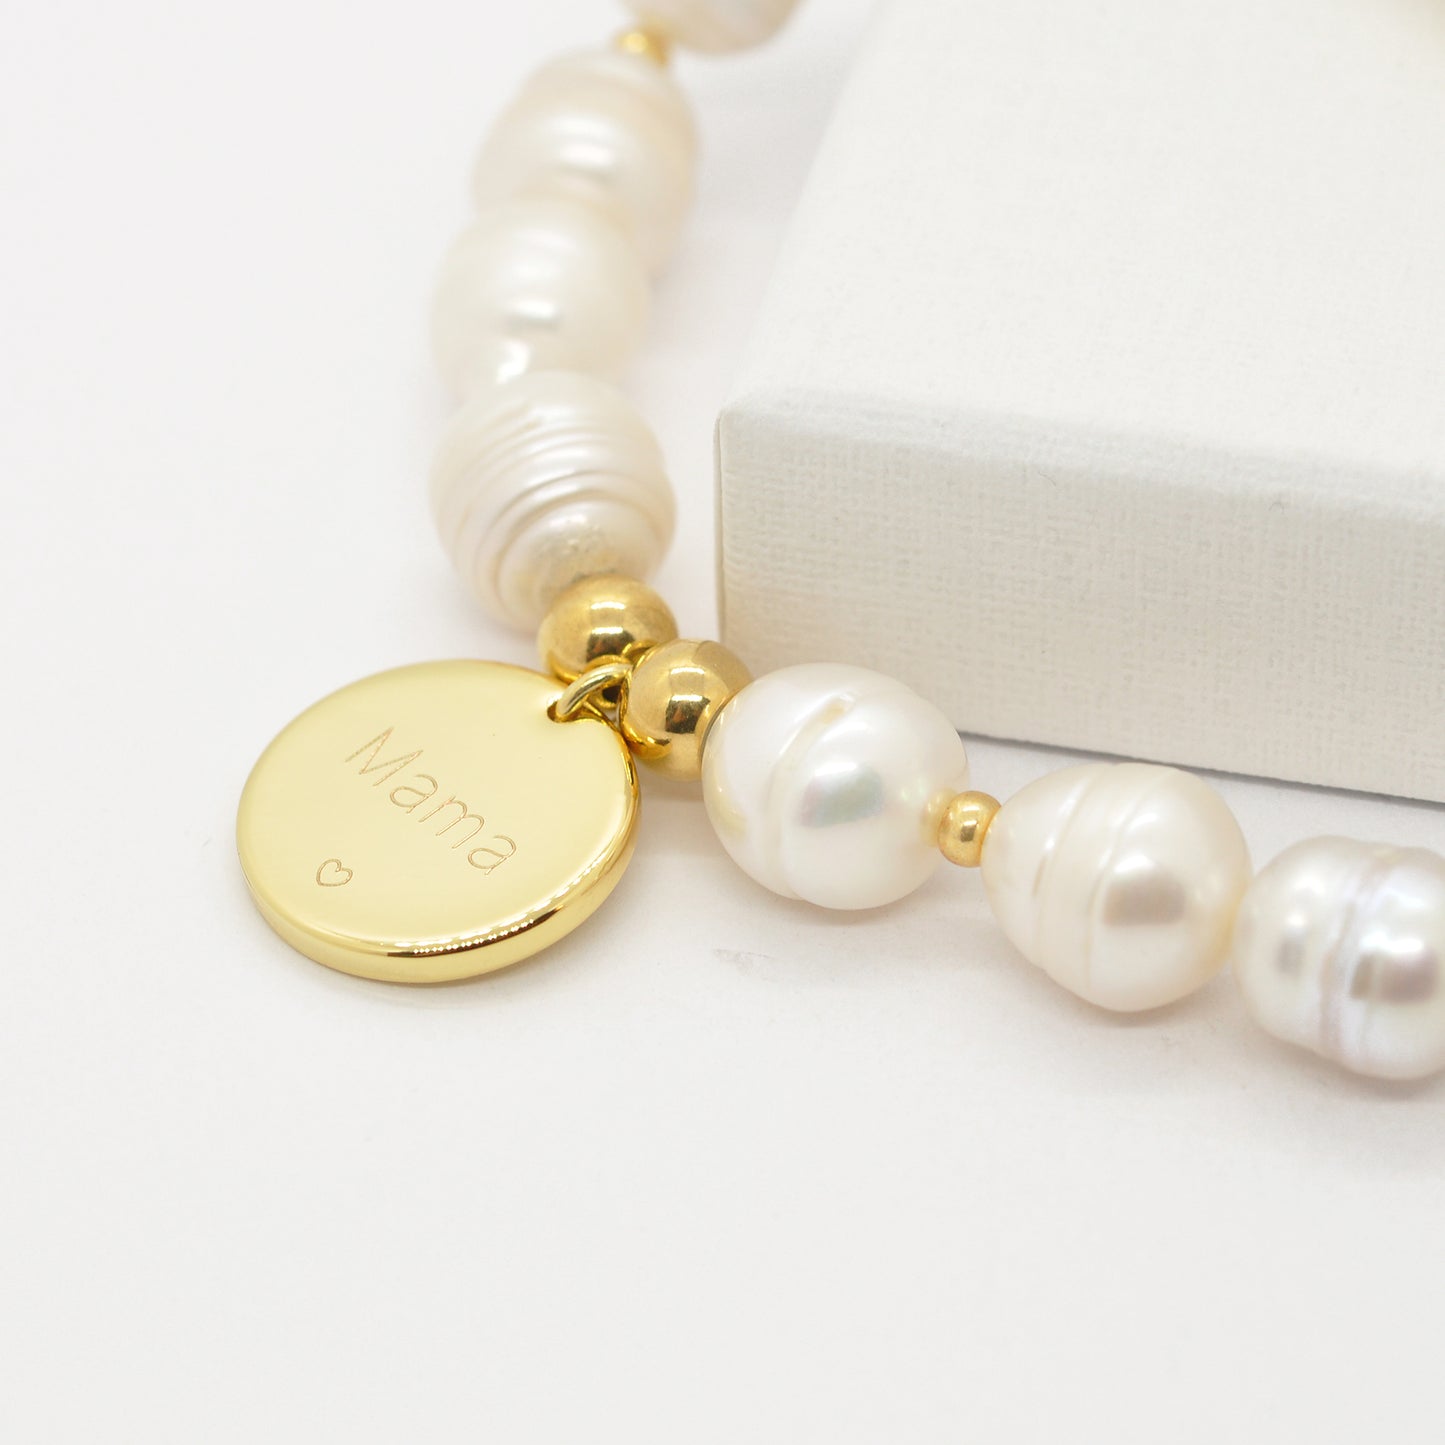 Mama bracelet made of large freshwater pearl / gold plated